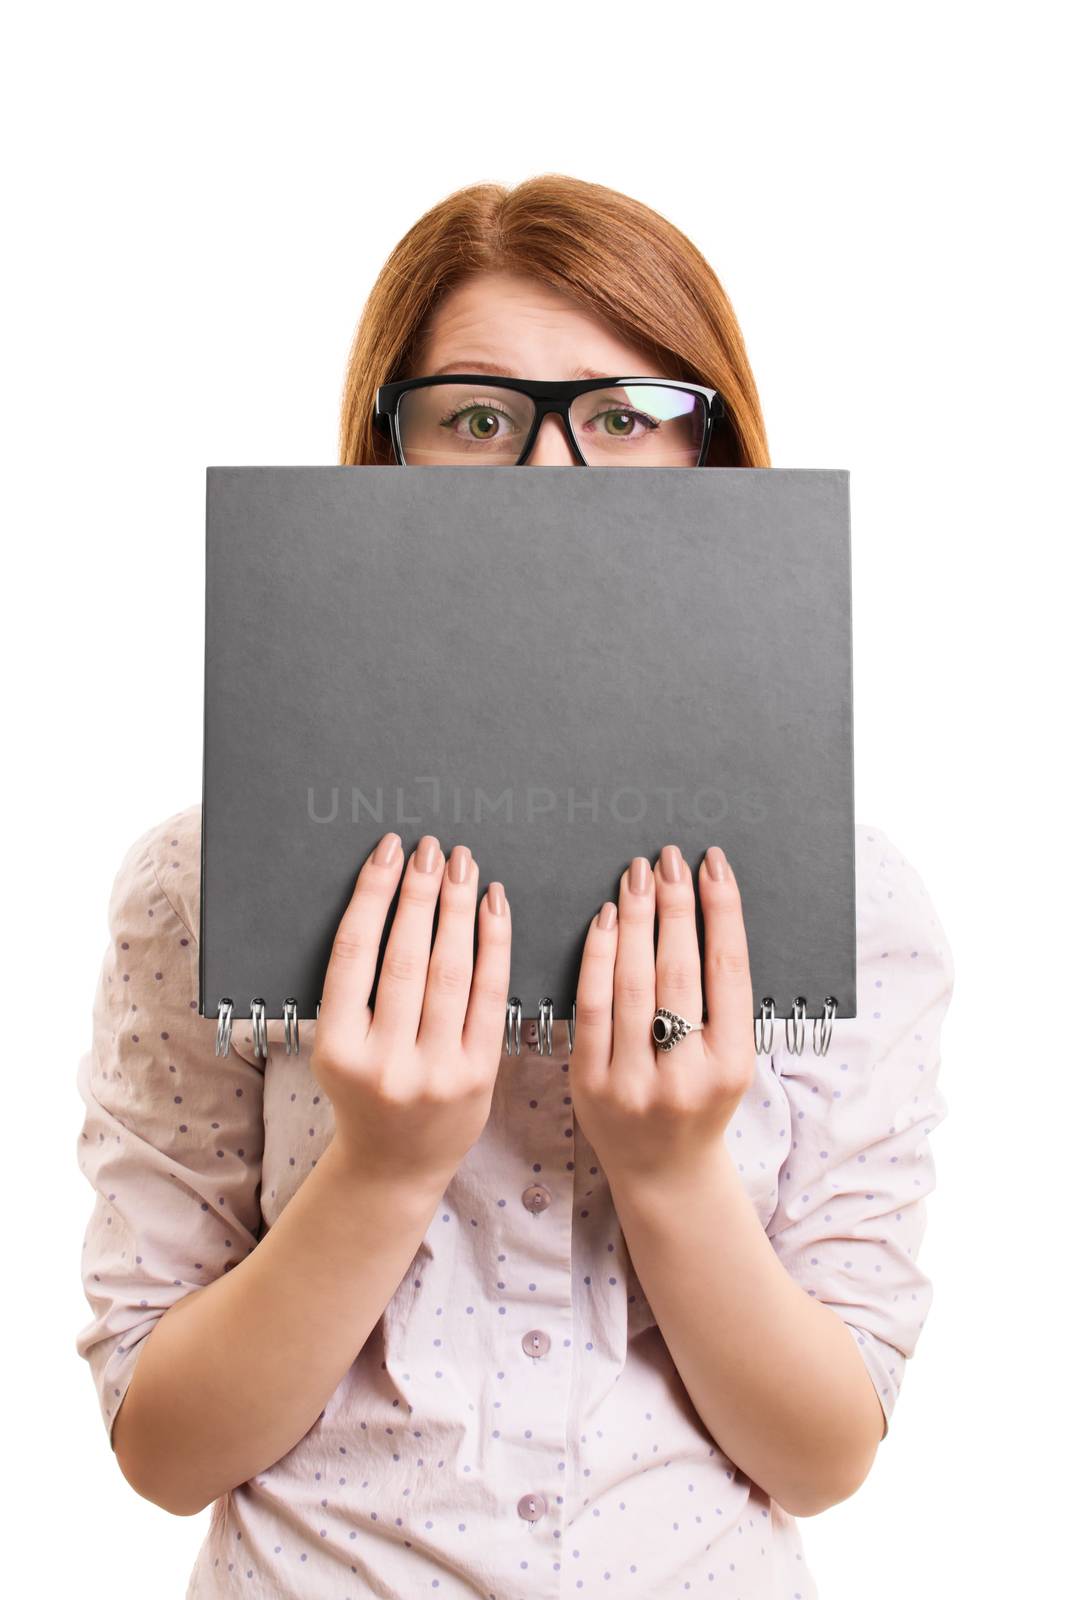 A portrait of a worried female student hiding behind her book, isolated on white background.